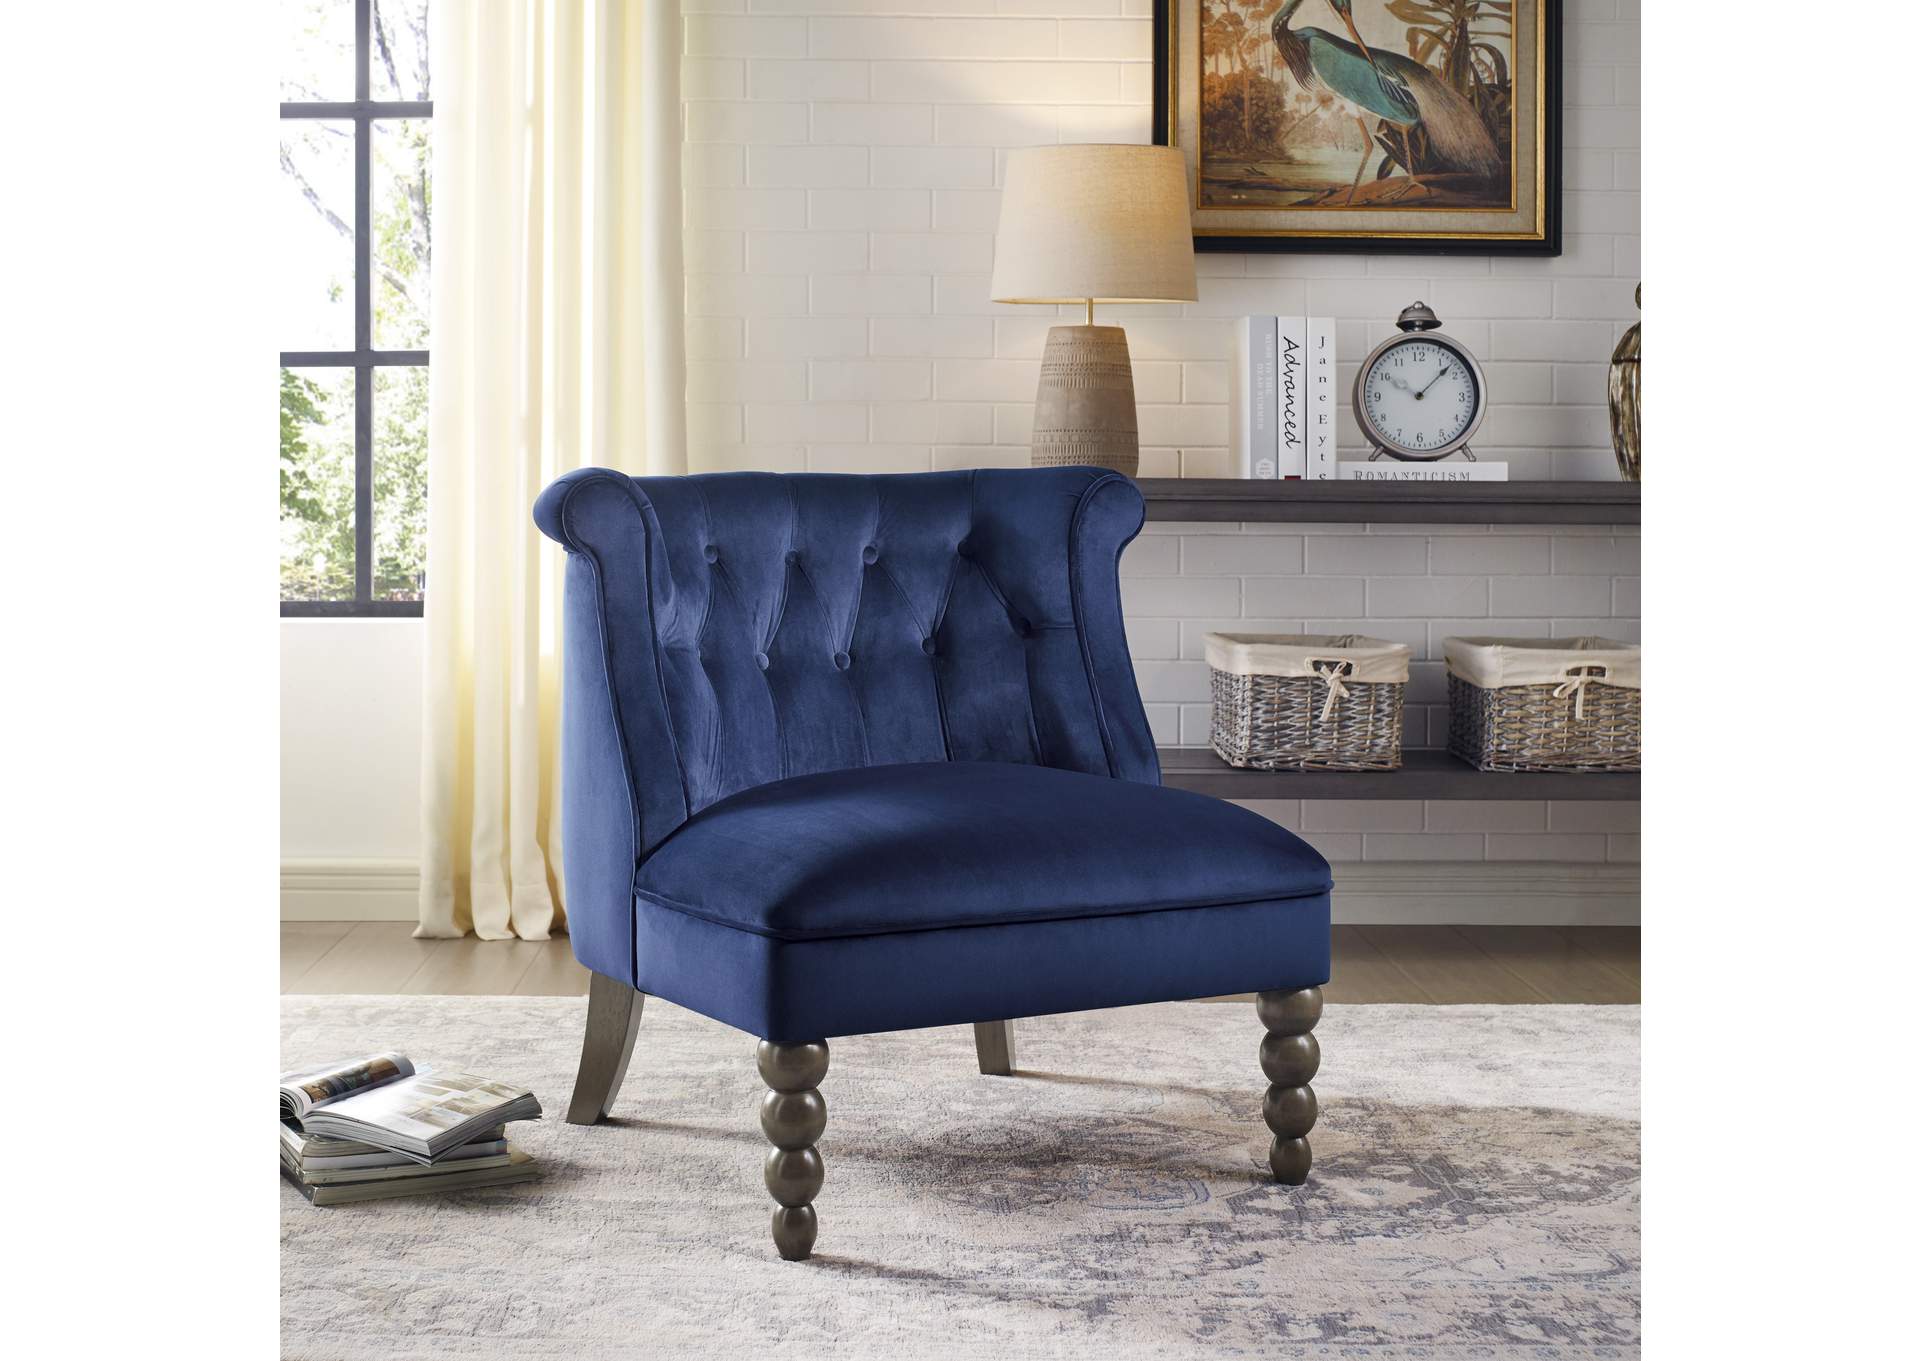 Navy Accent Chair In Living Room